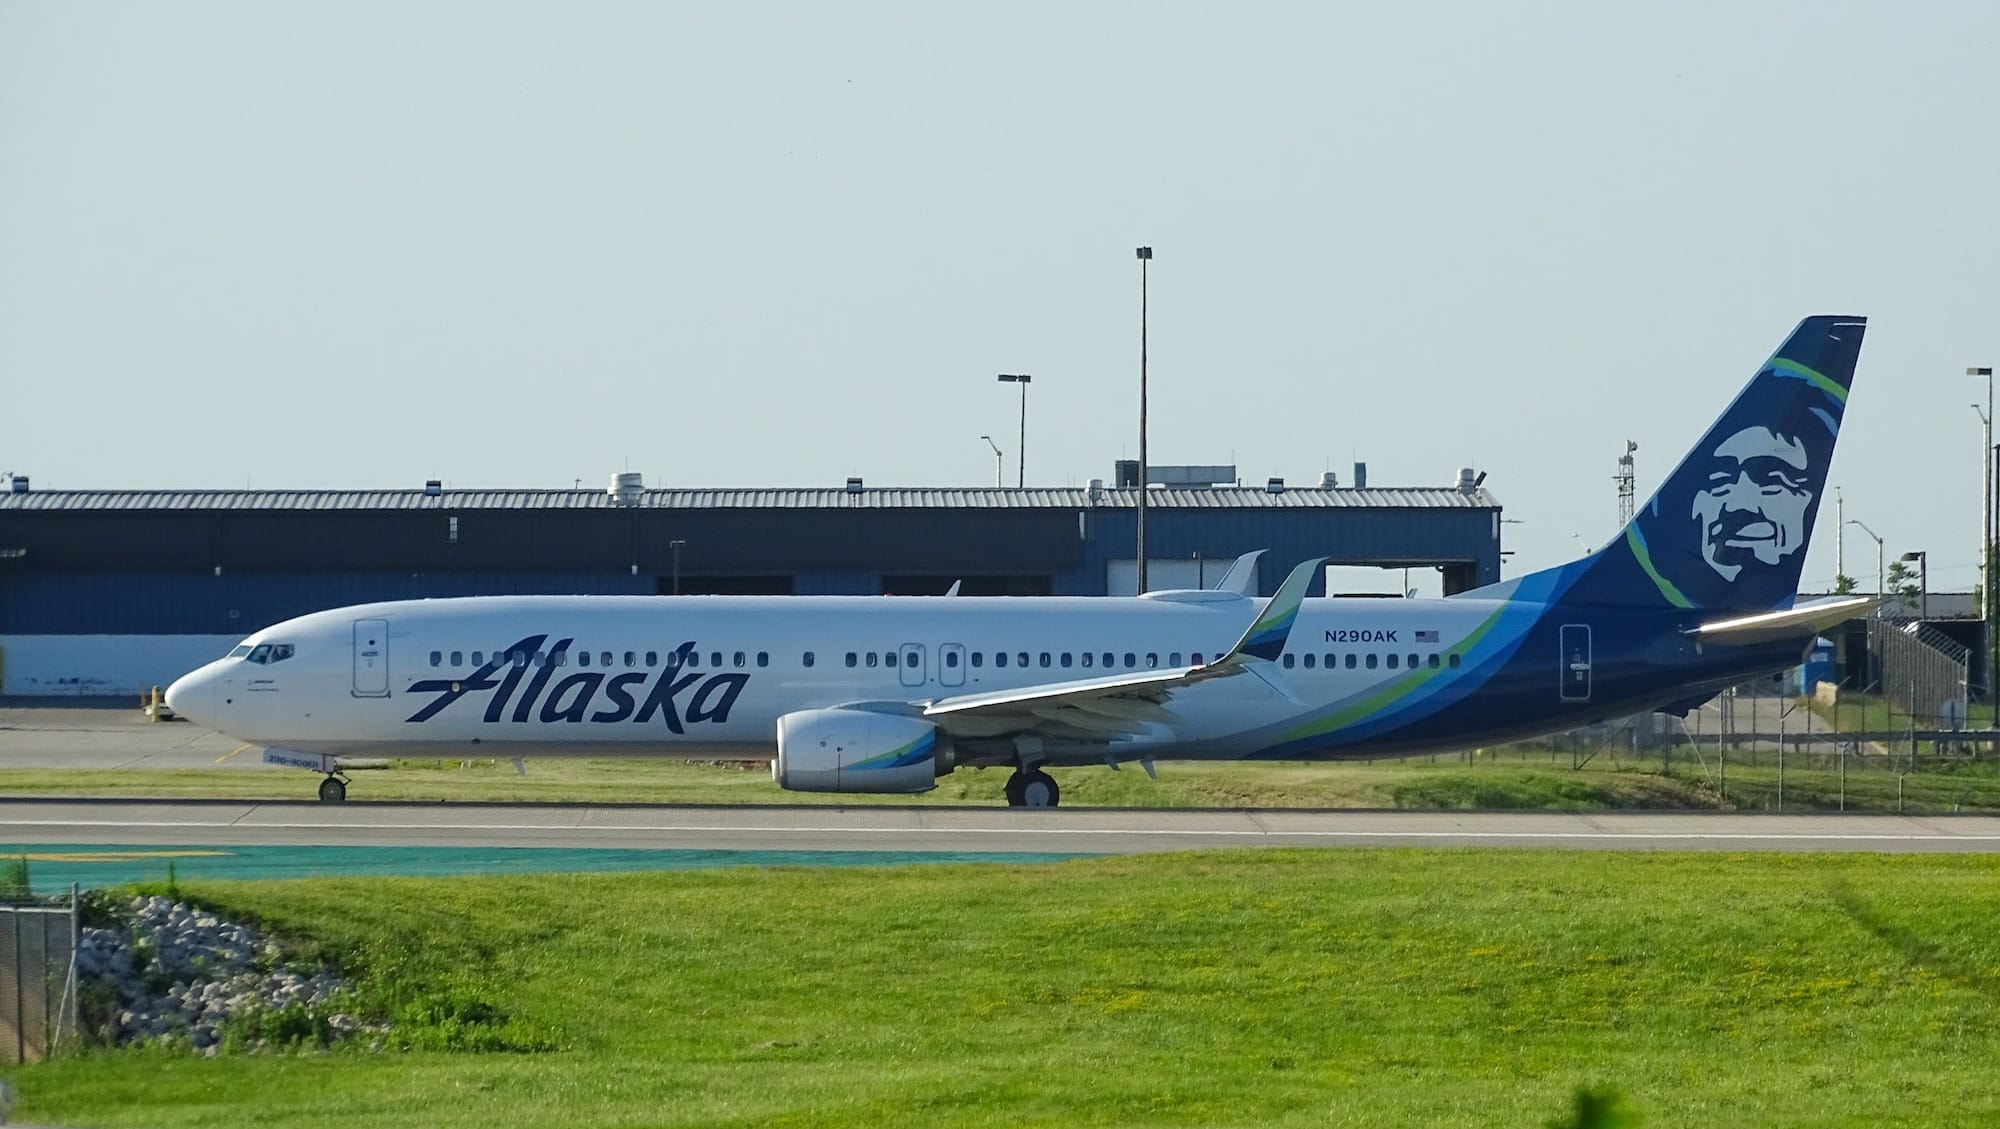 Alaska Airlines Marks 35 Years of Connecting the U.S. West Coast with Mexico